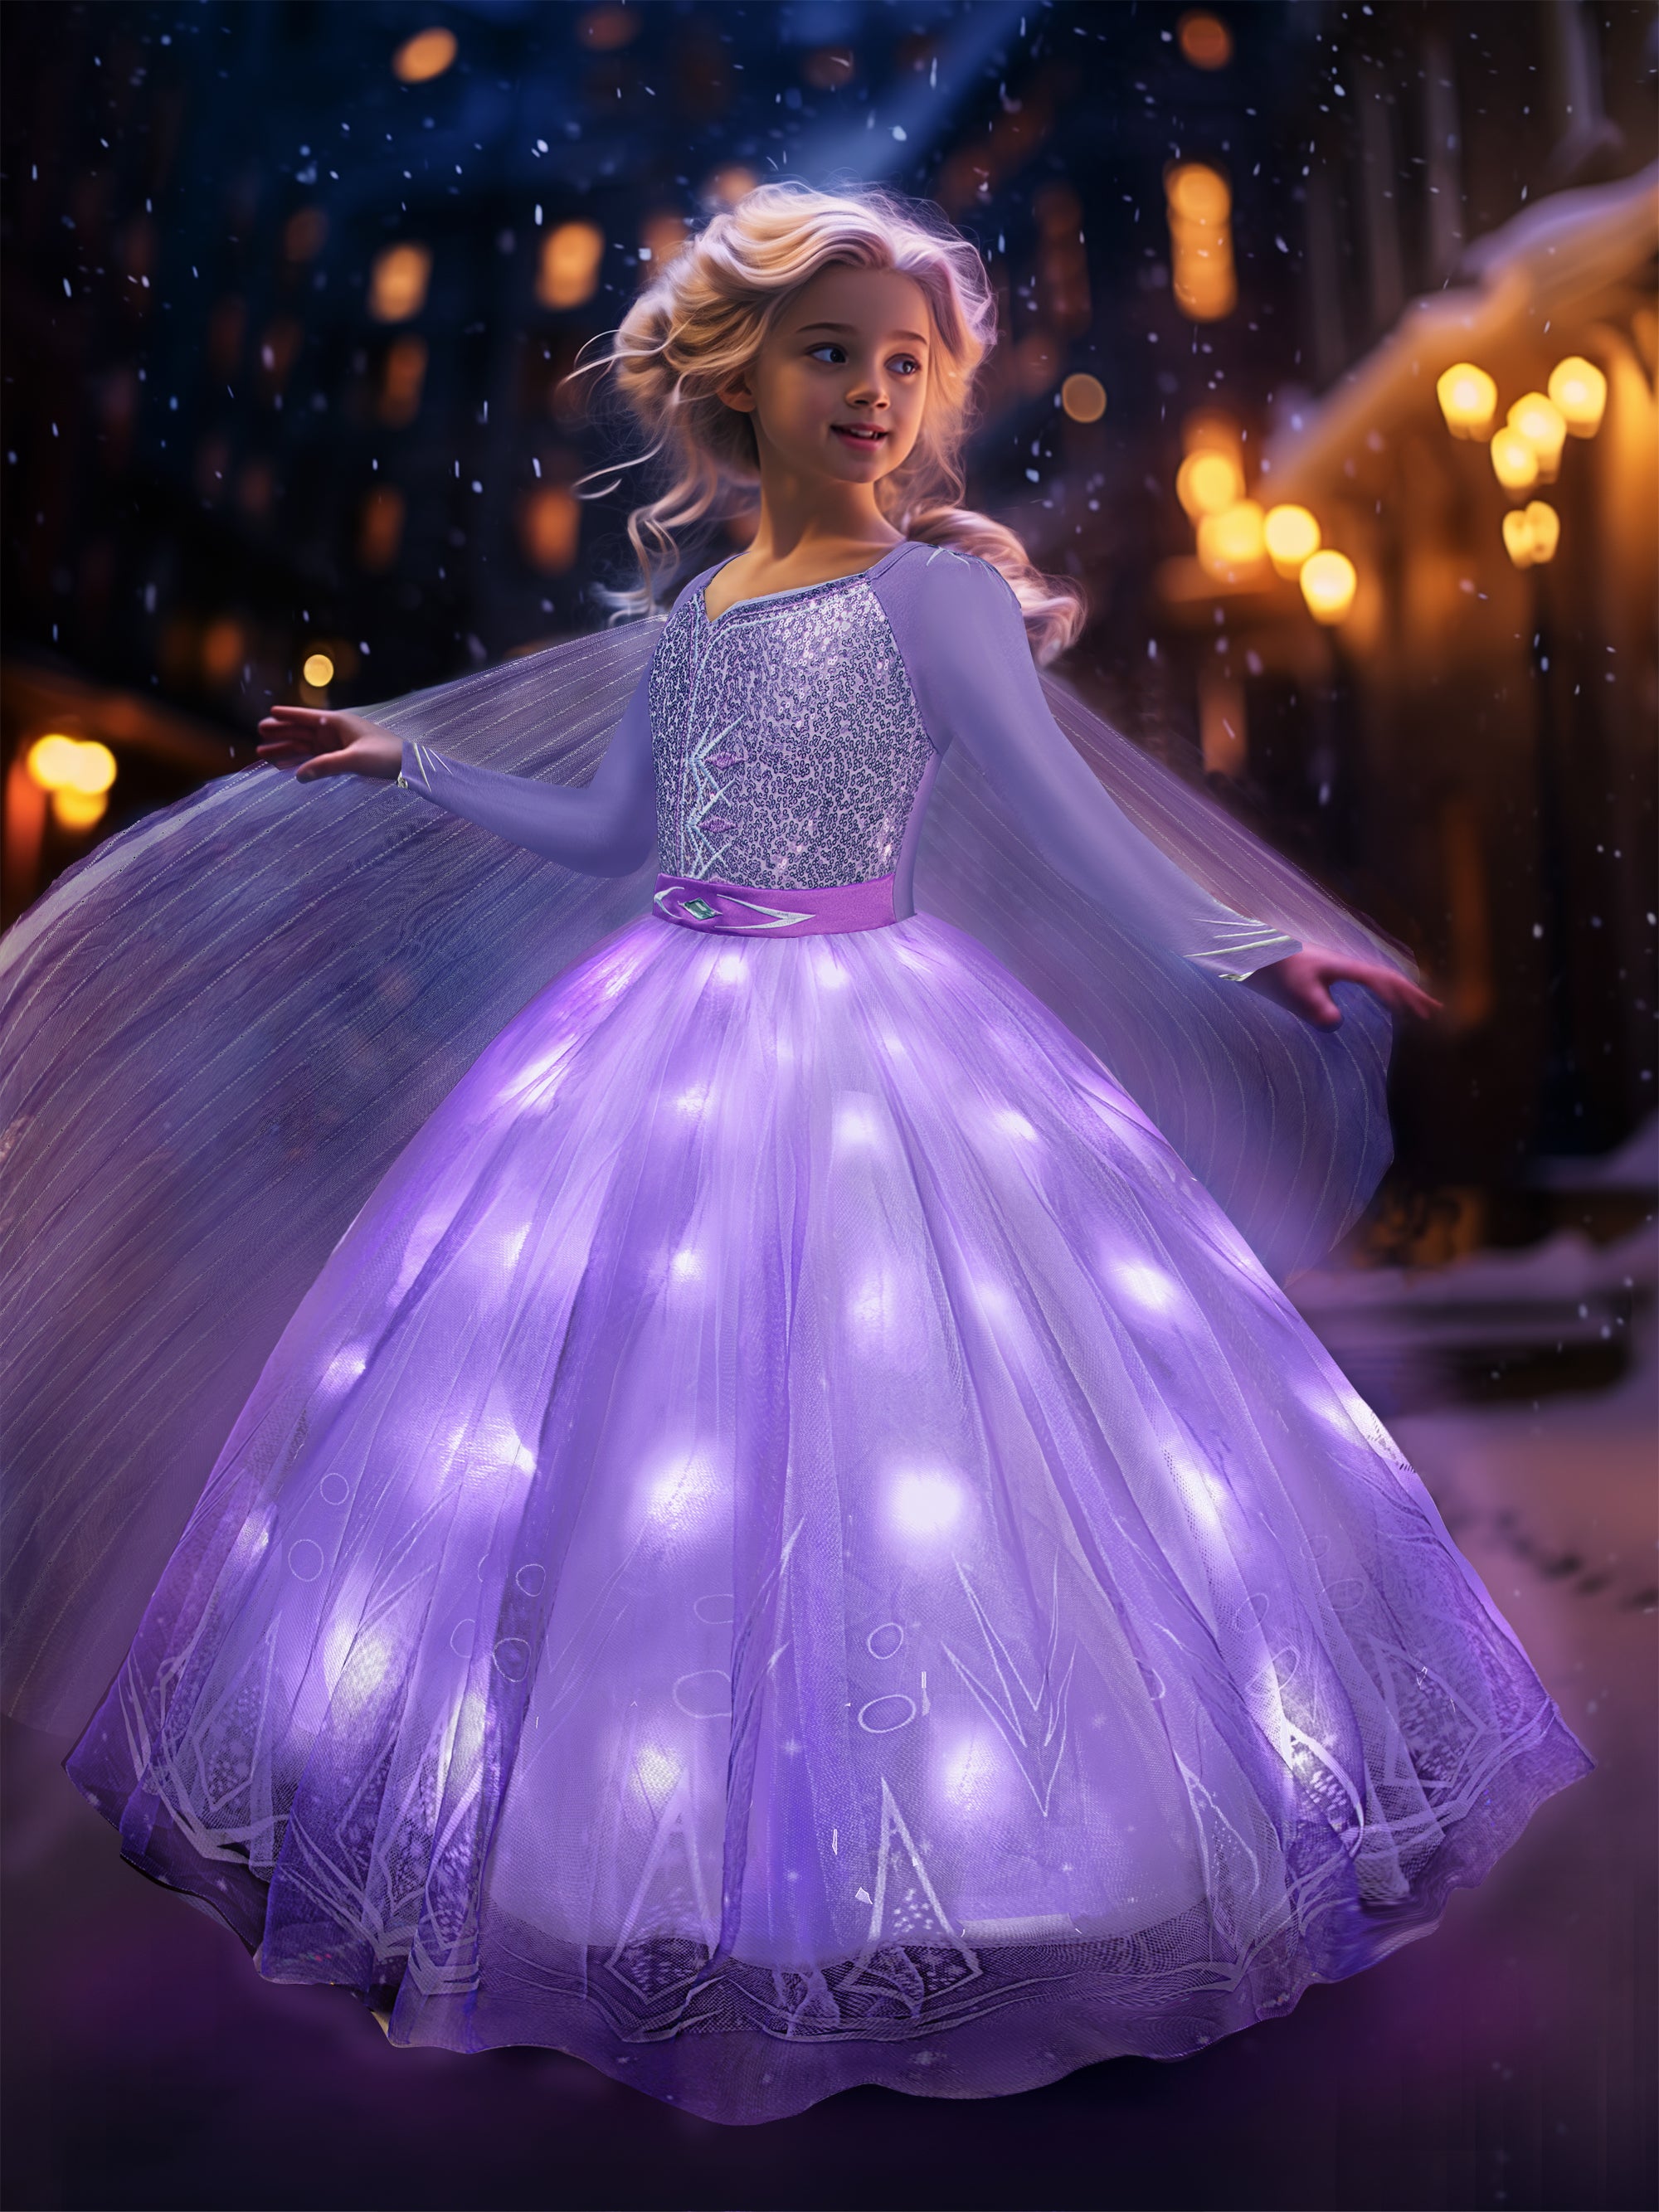 Girl Snow Party Dress Cosplay Dress up